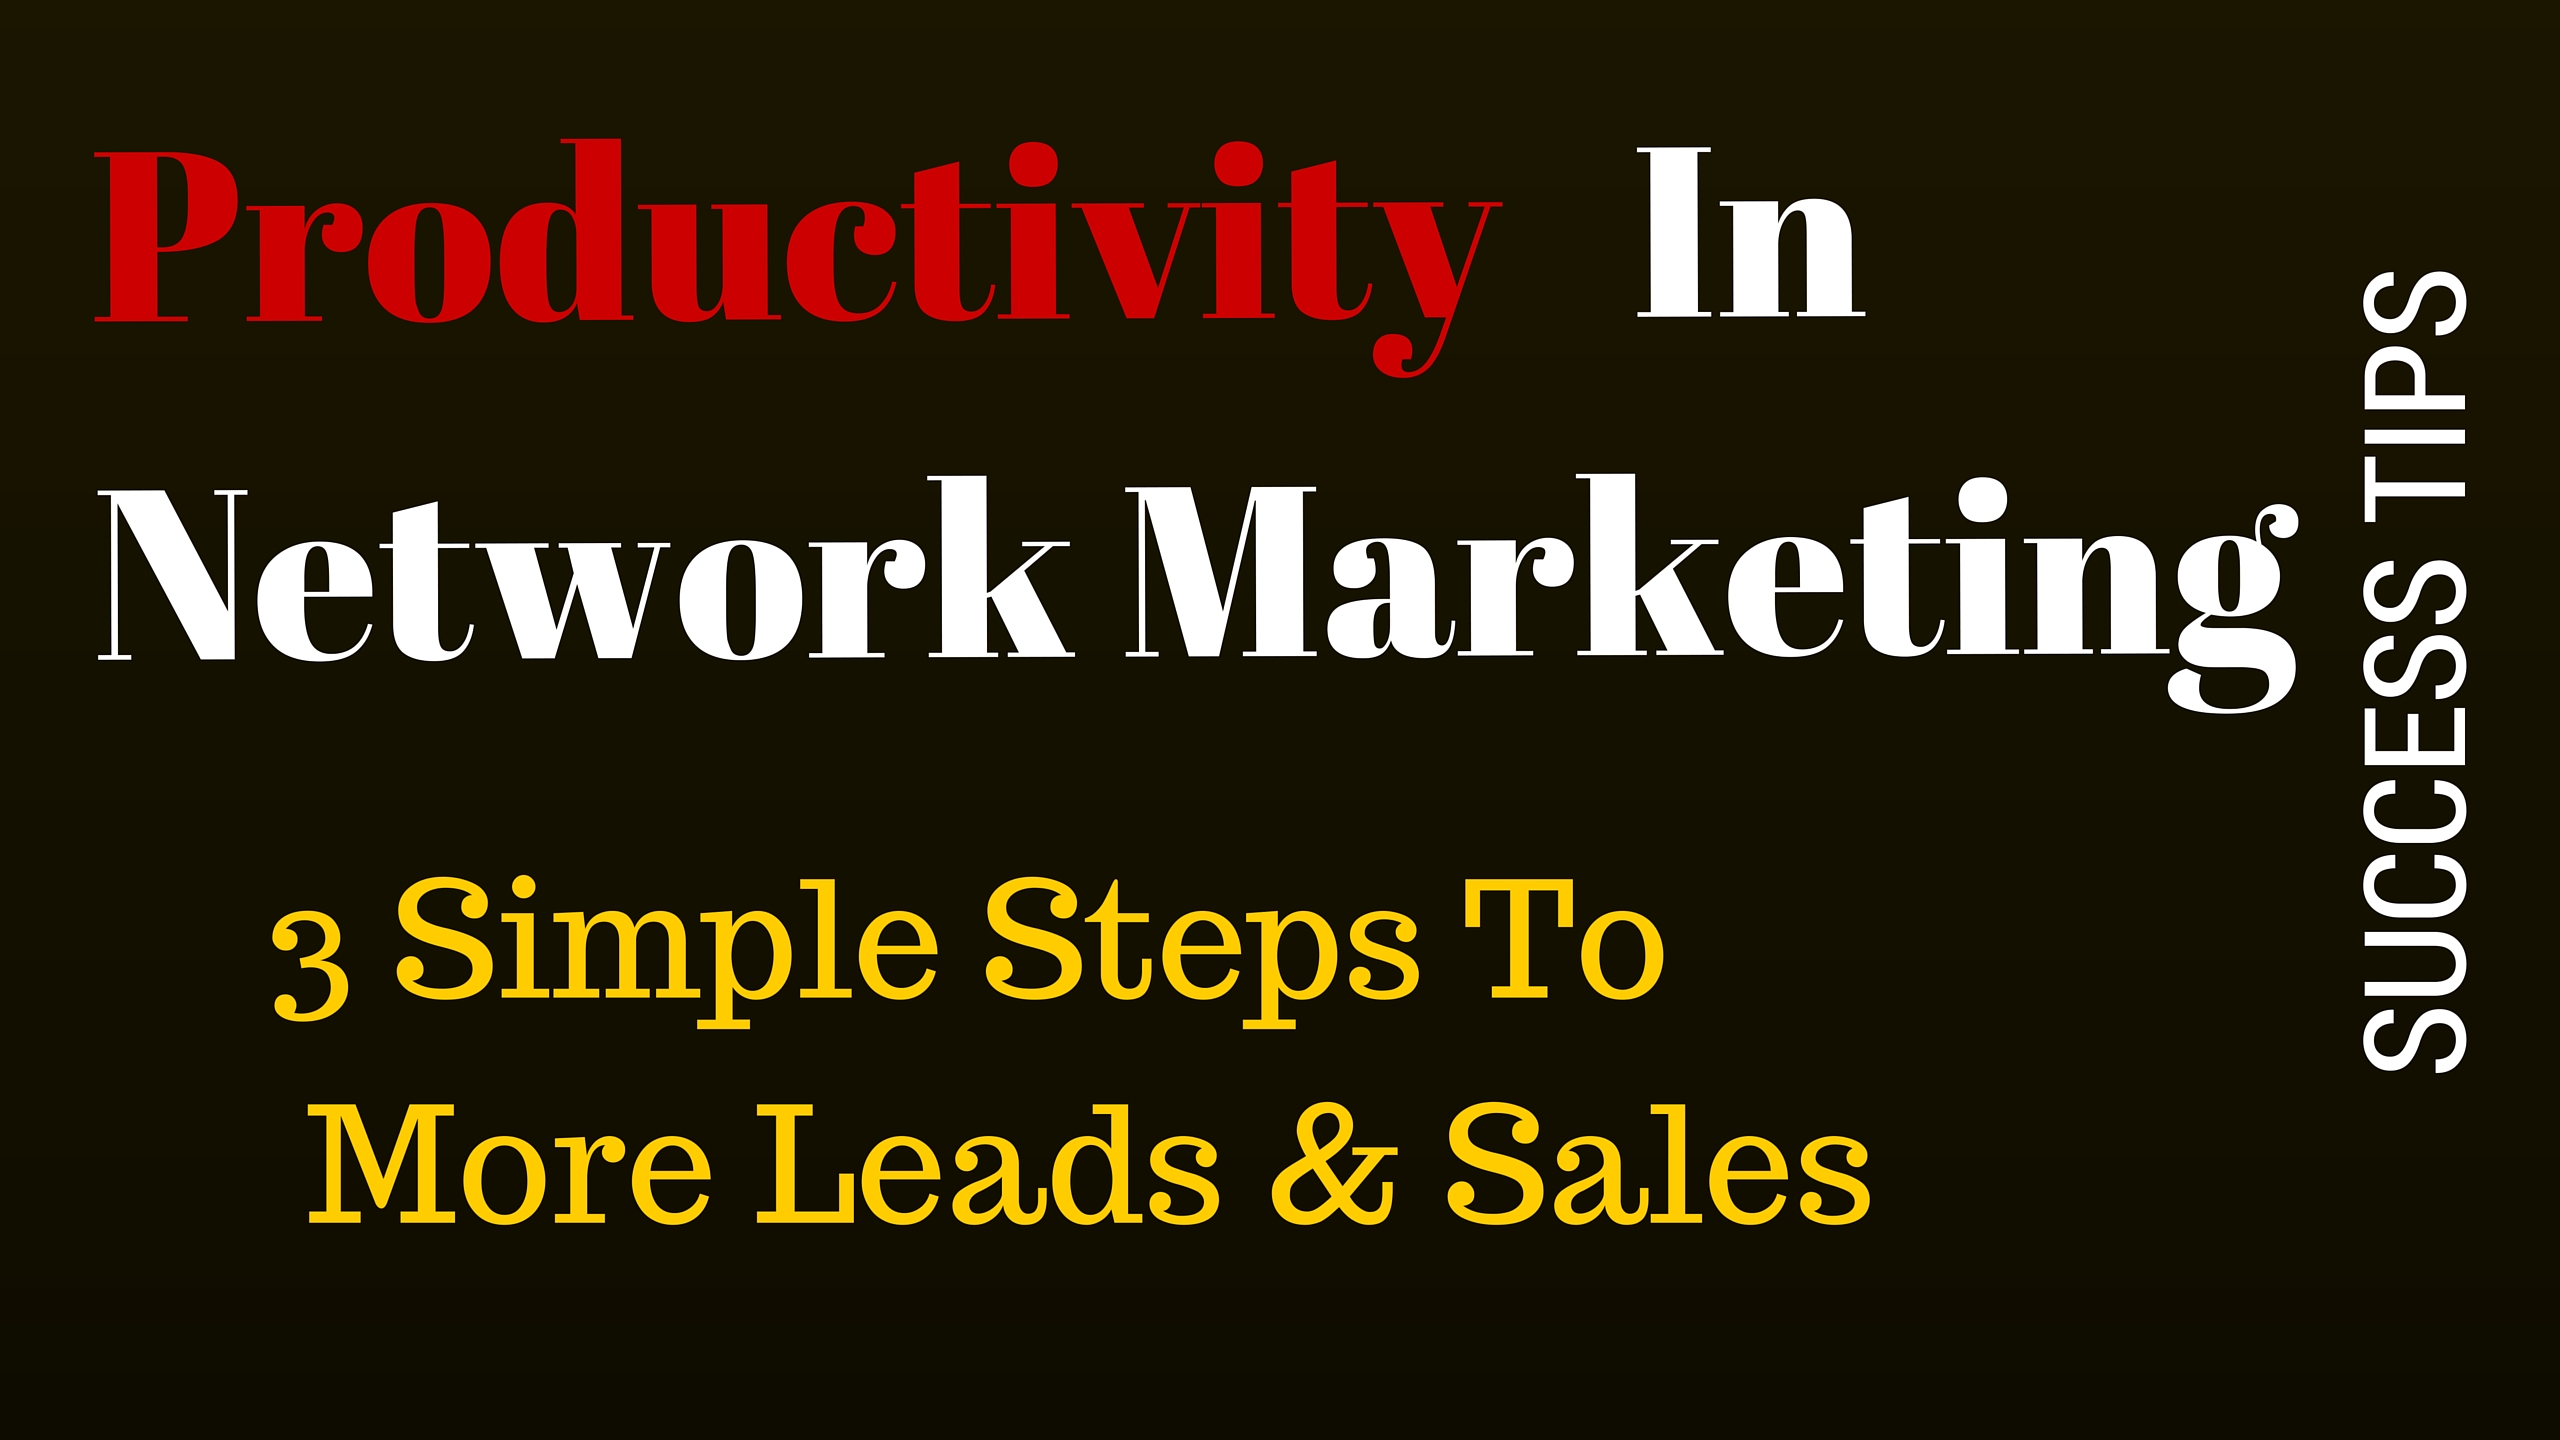 Productivity in Network Marketing – Recruit More Now!